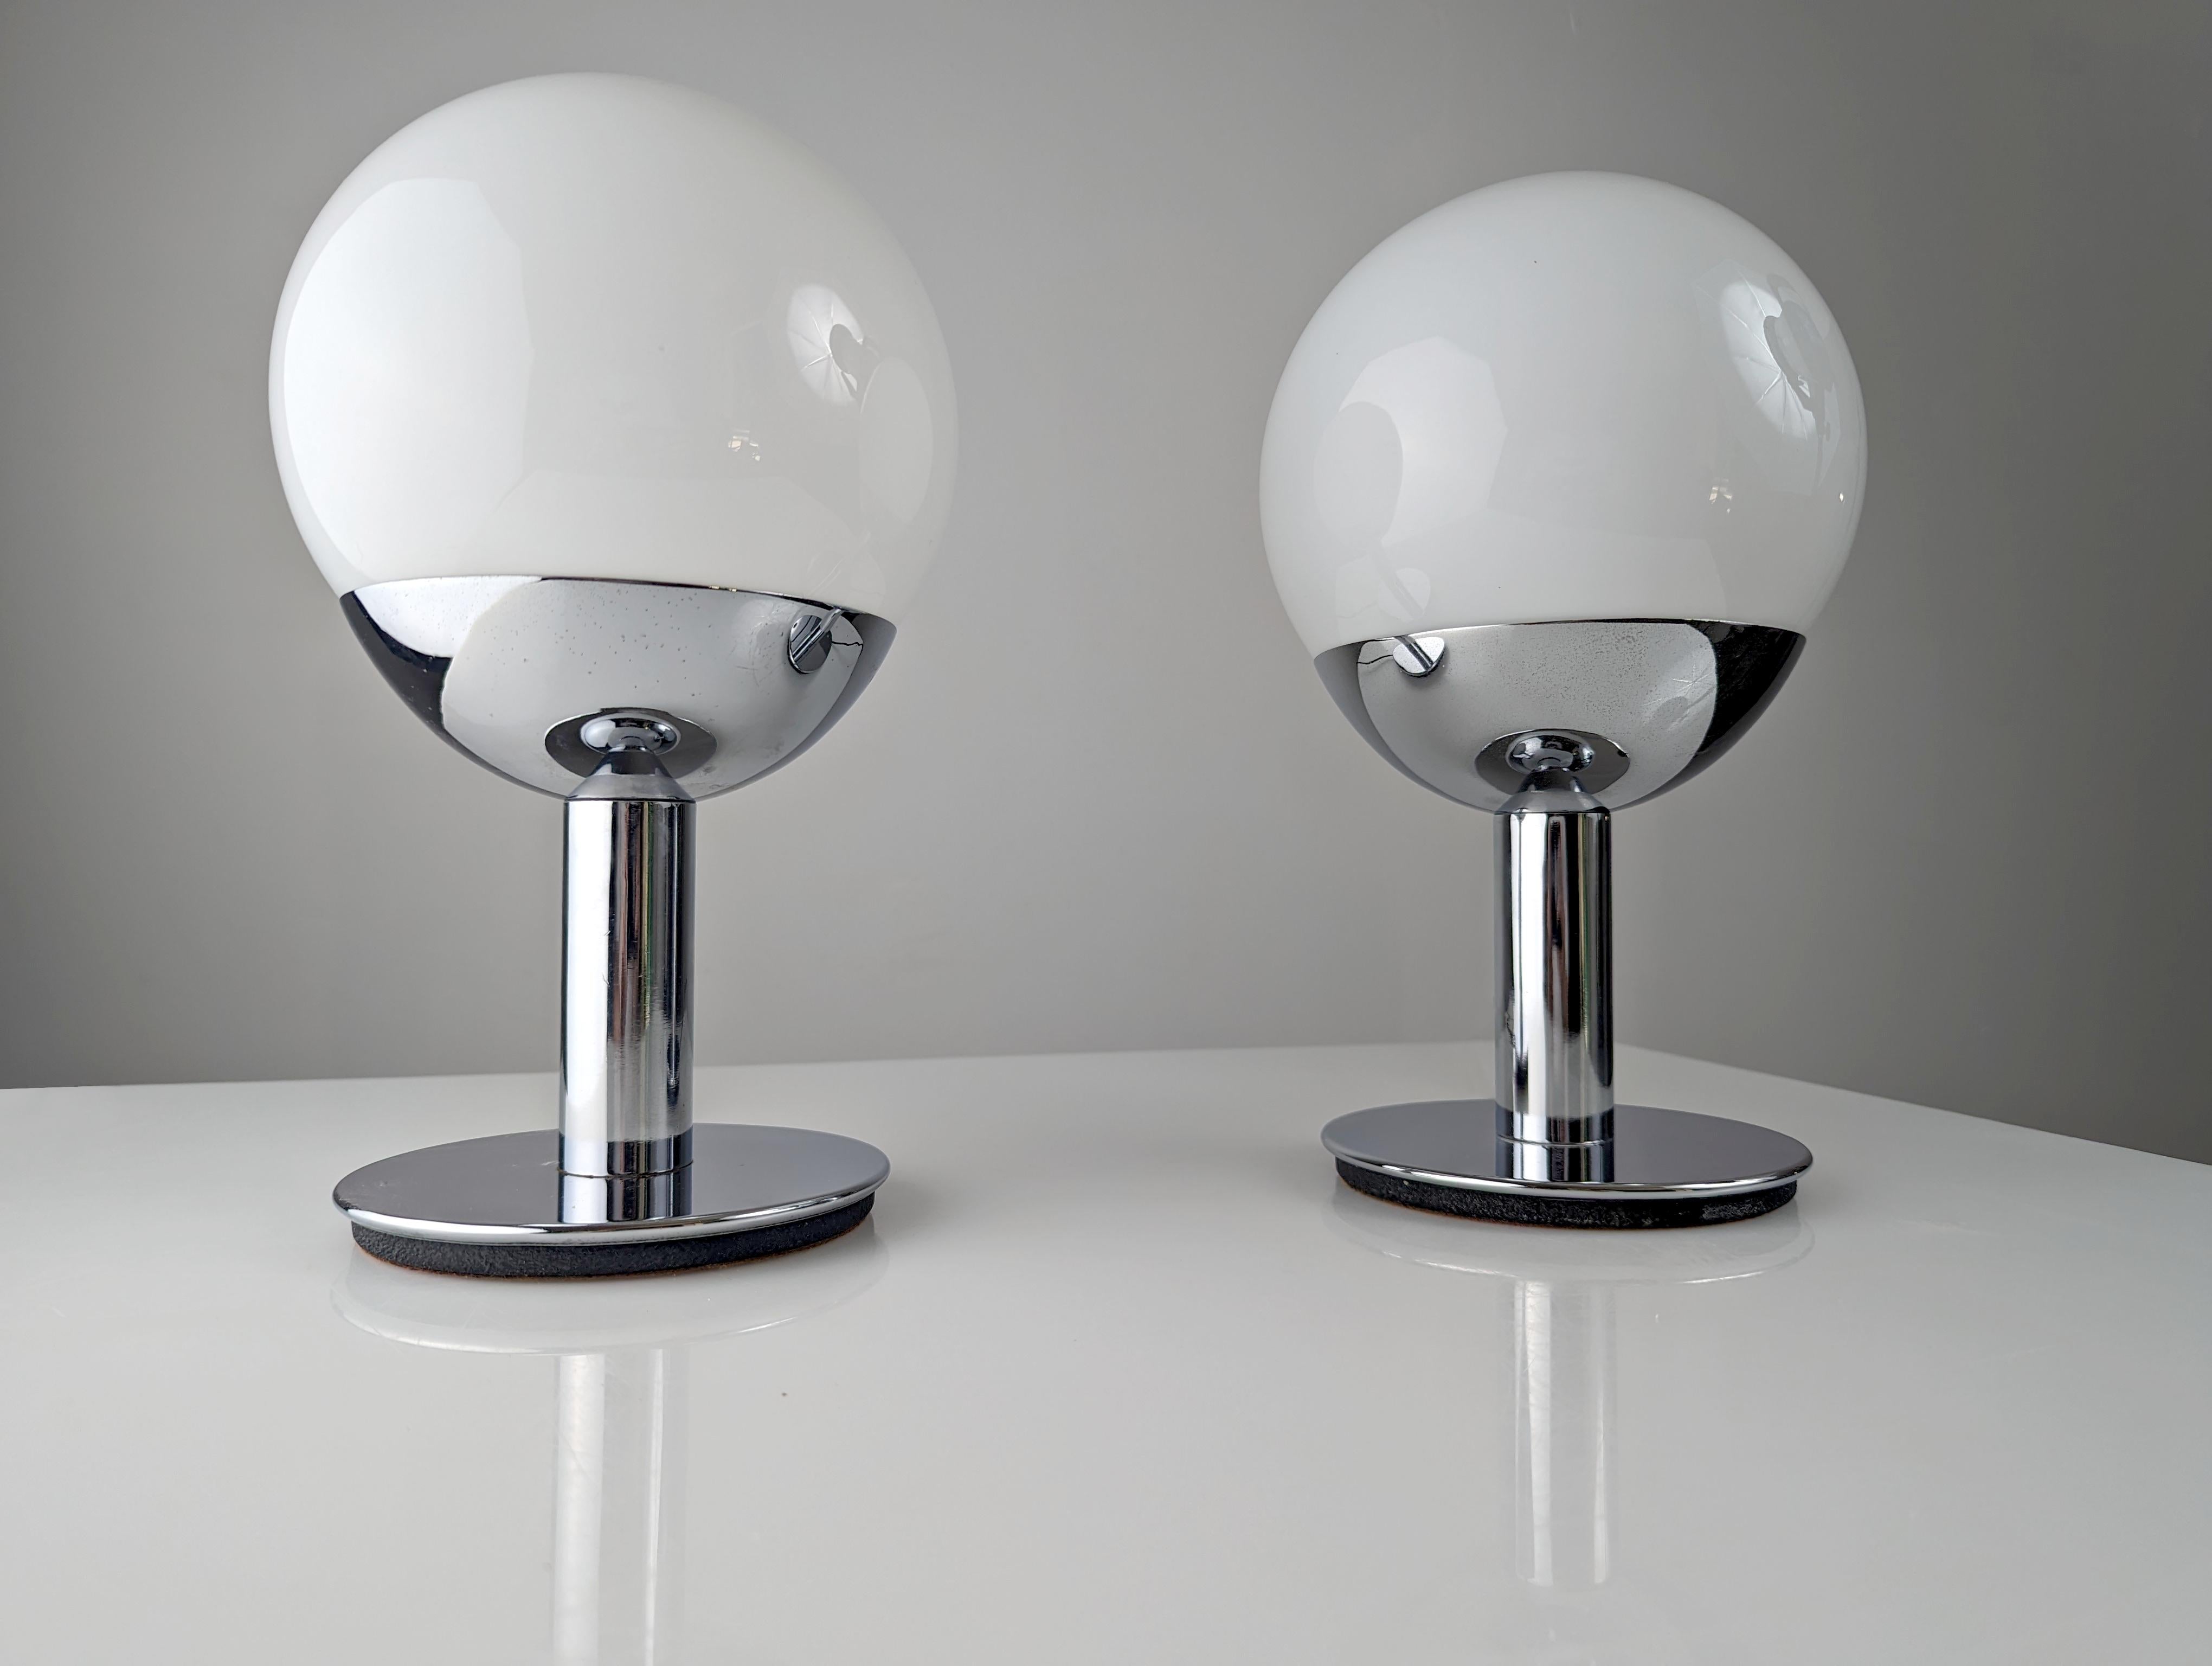 Wonderful pair of chrome lamps attributed to the great Italian designer Pia Guidetti Crippa who made these fantastic globe designs on enveloping brass and chrome metal bases in the middle of the century for LUCI Illuminazione. The combination of